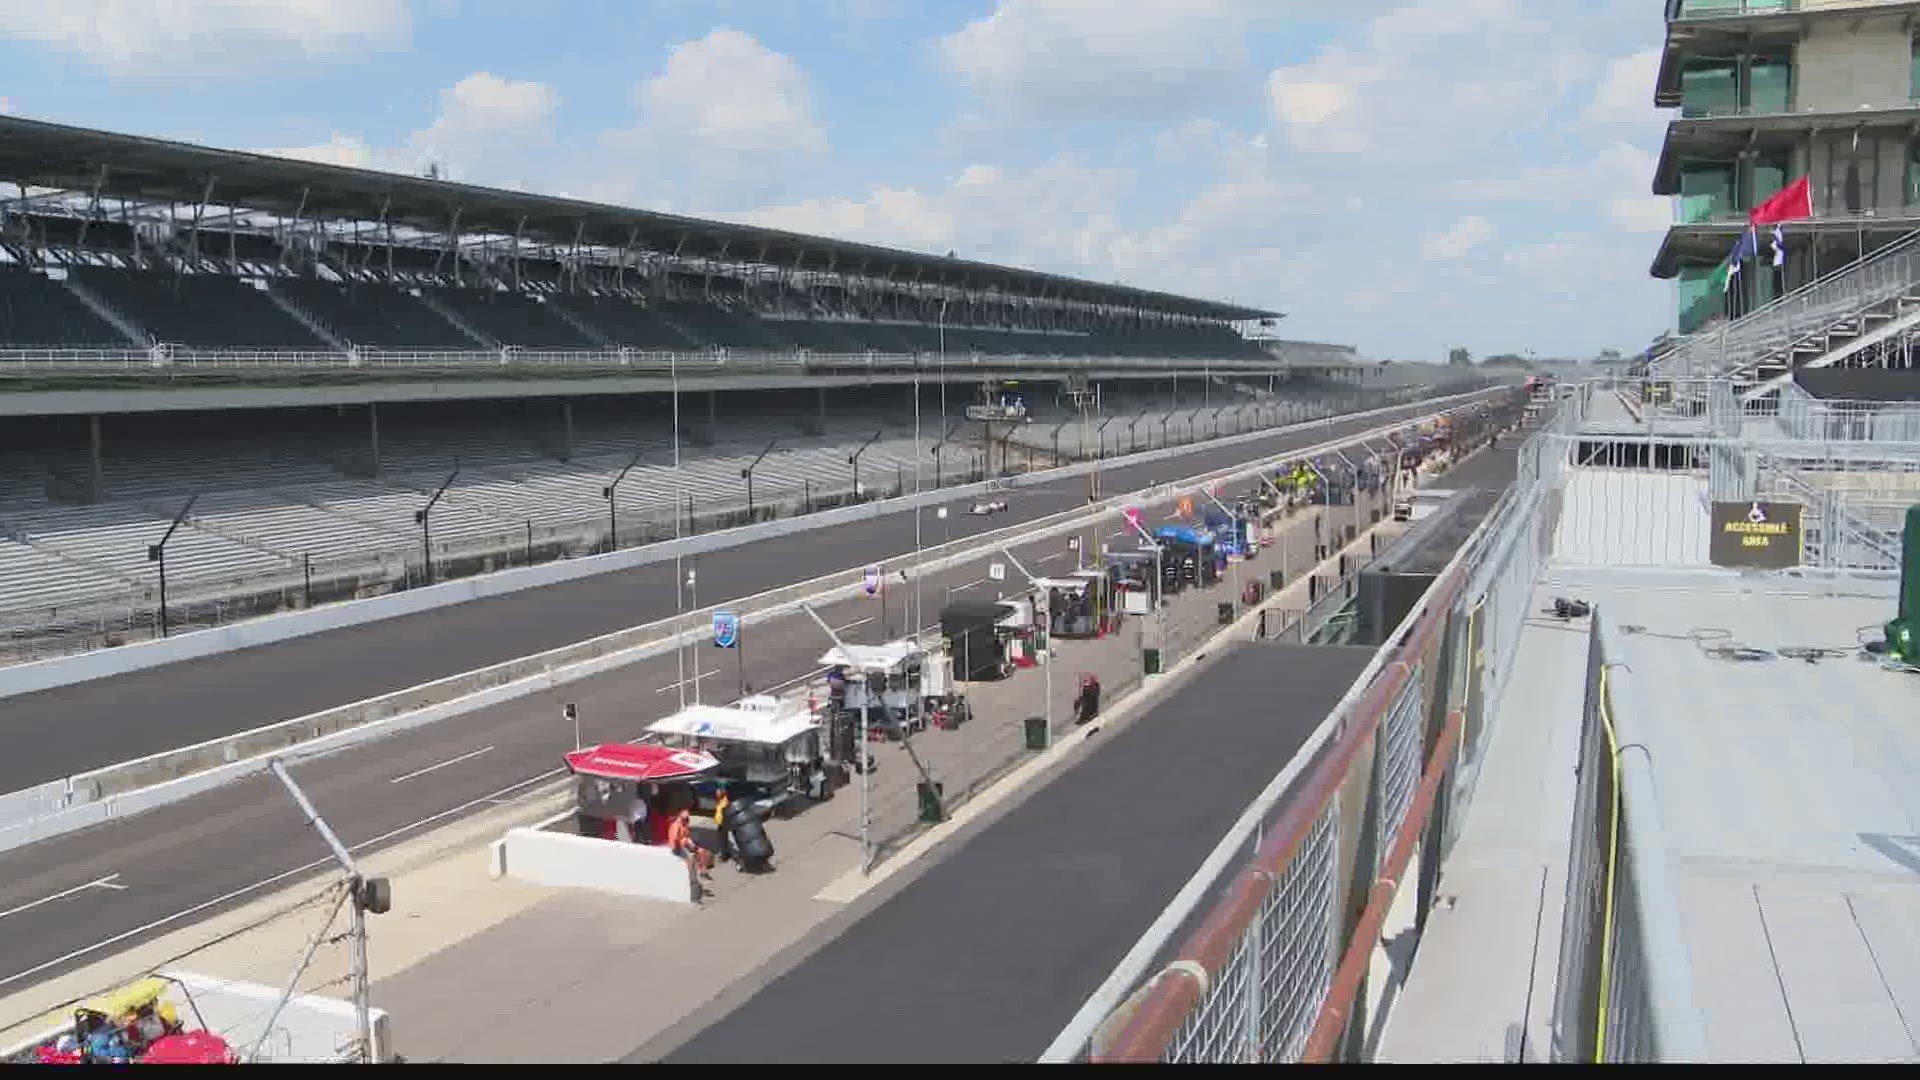 It's qualifying weekend at the Indianapolis Motor Speedway.